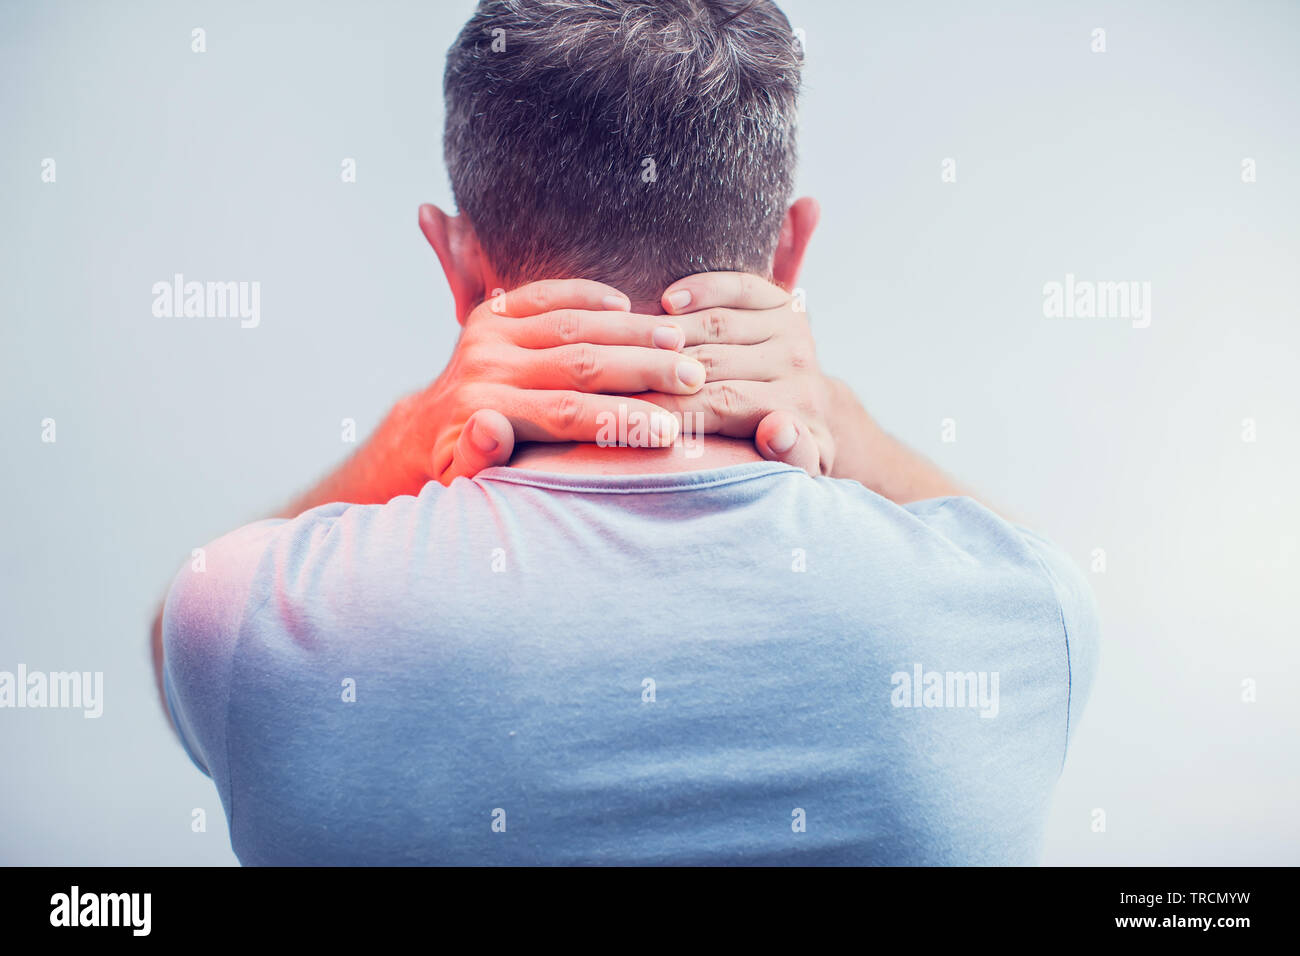 People, healthcare and problem concept - close up of man suffering from neck pain over gray background Stock Photo